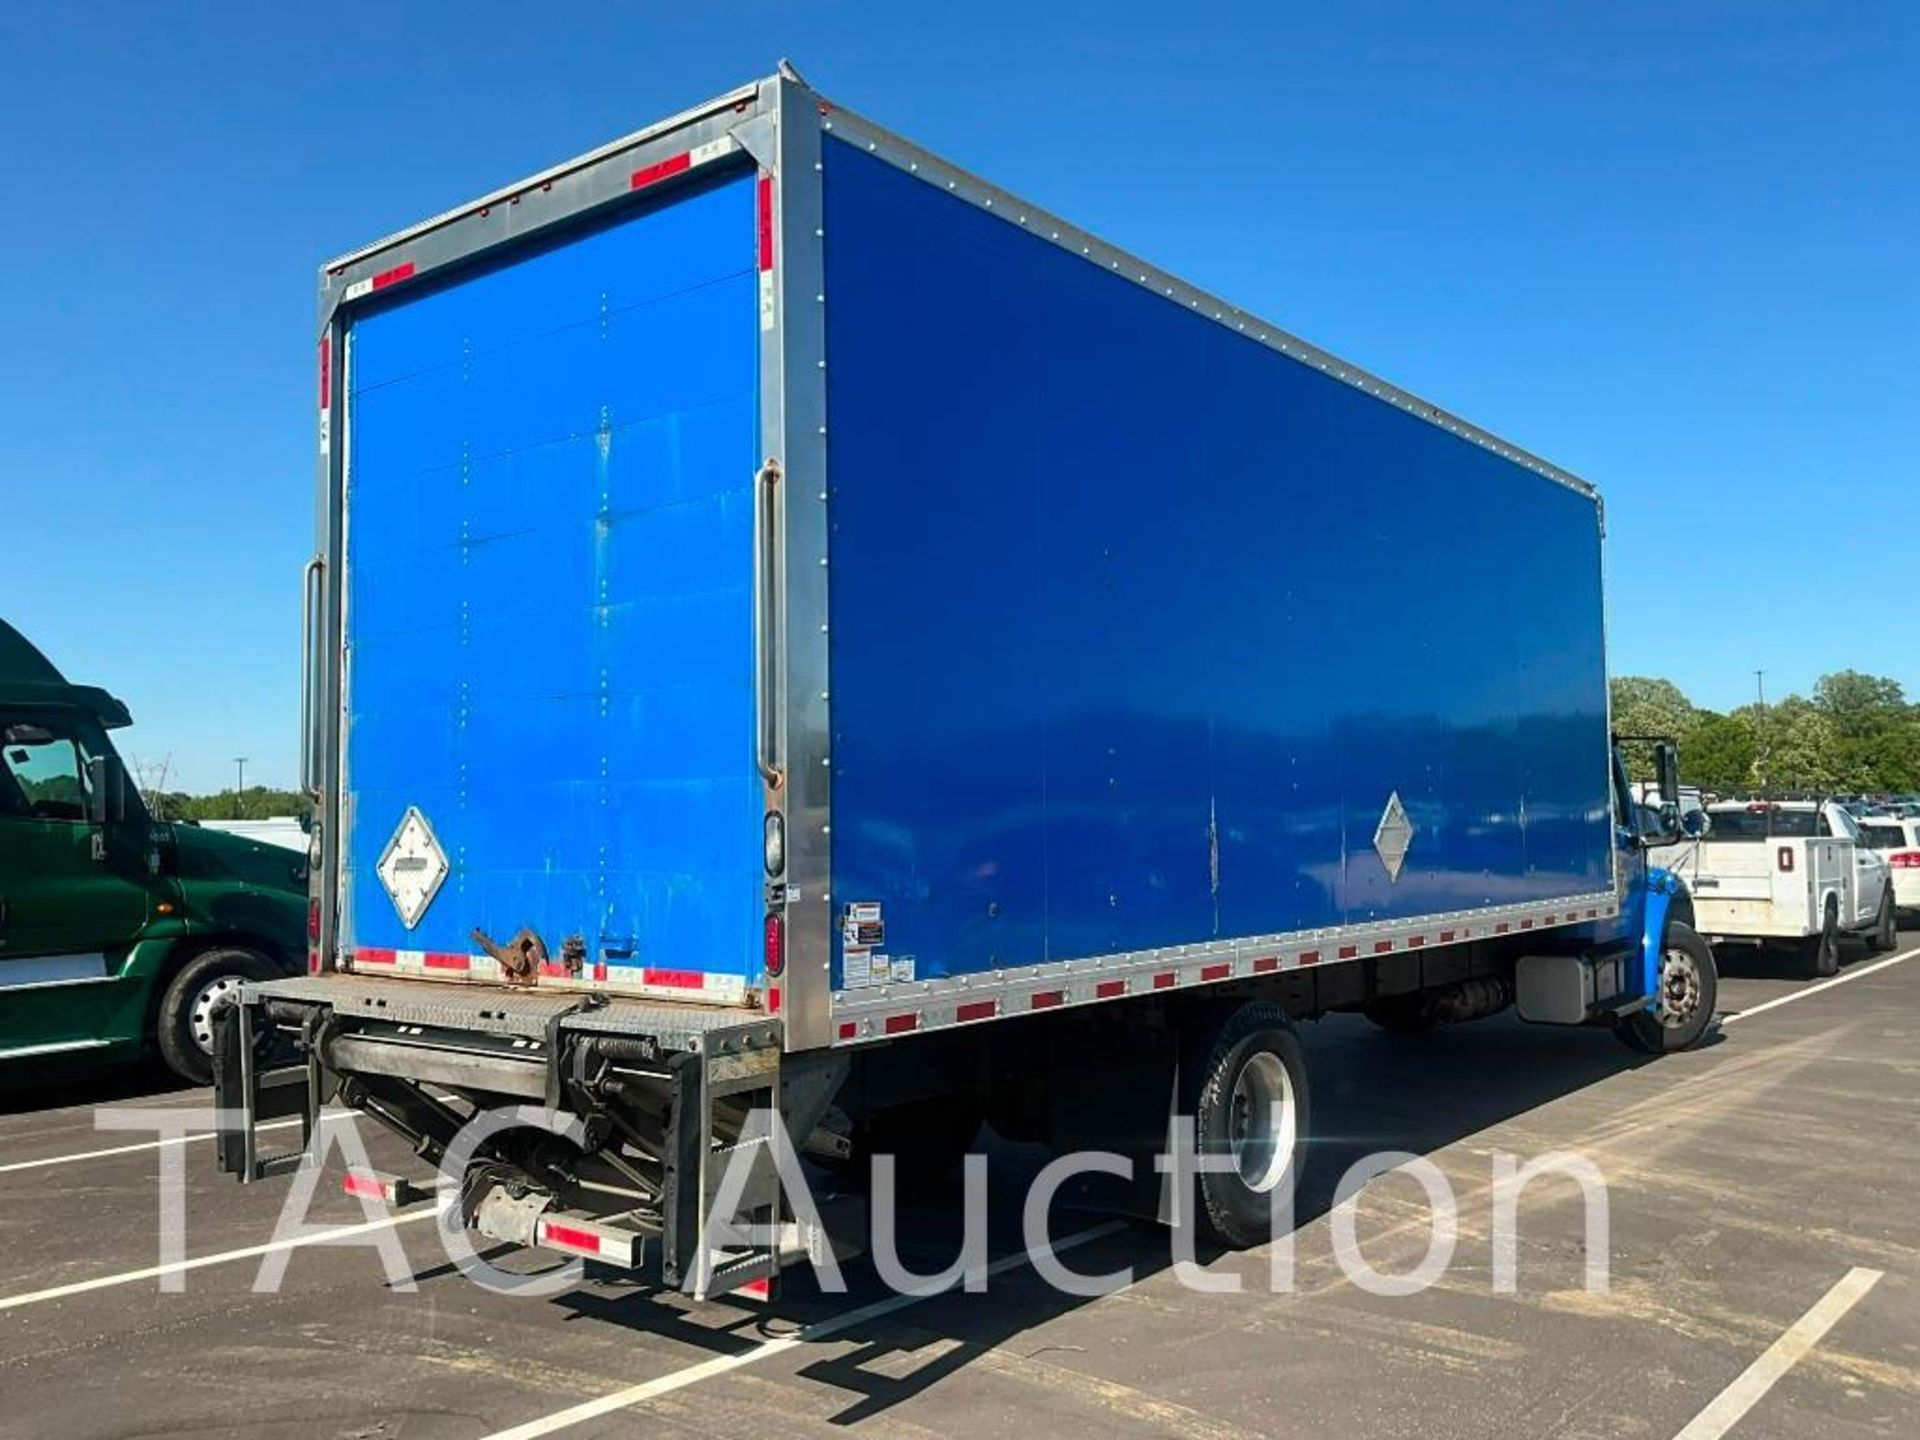 2018 Freightliner M2 Business Class 26ft Box Truck - Image 5 of 54